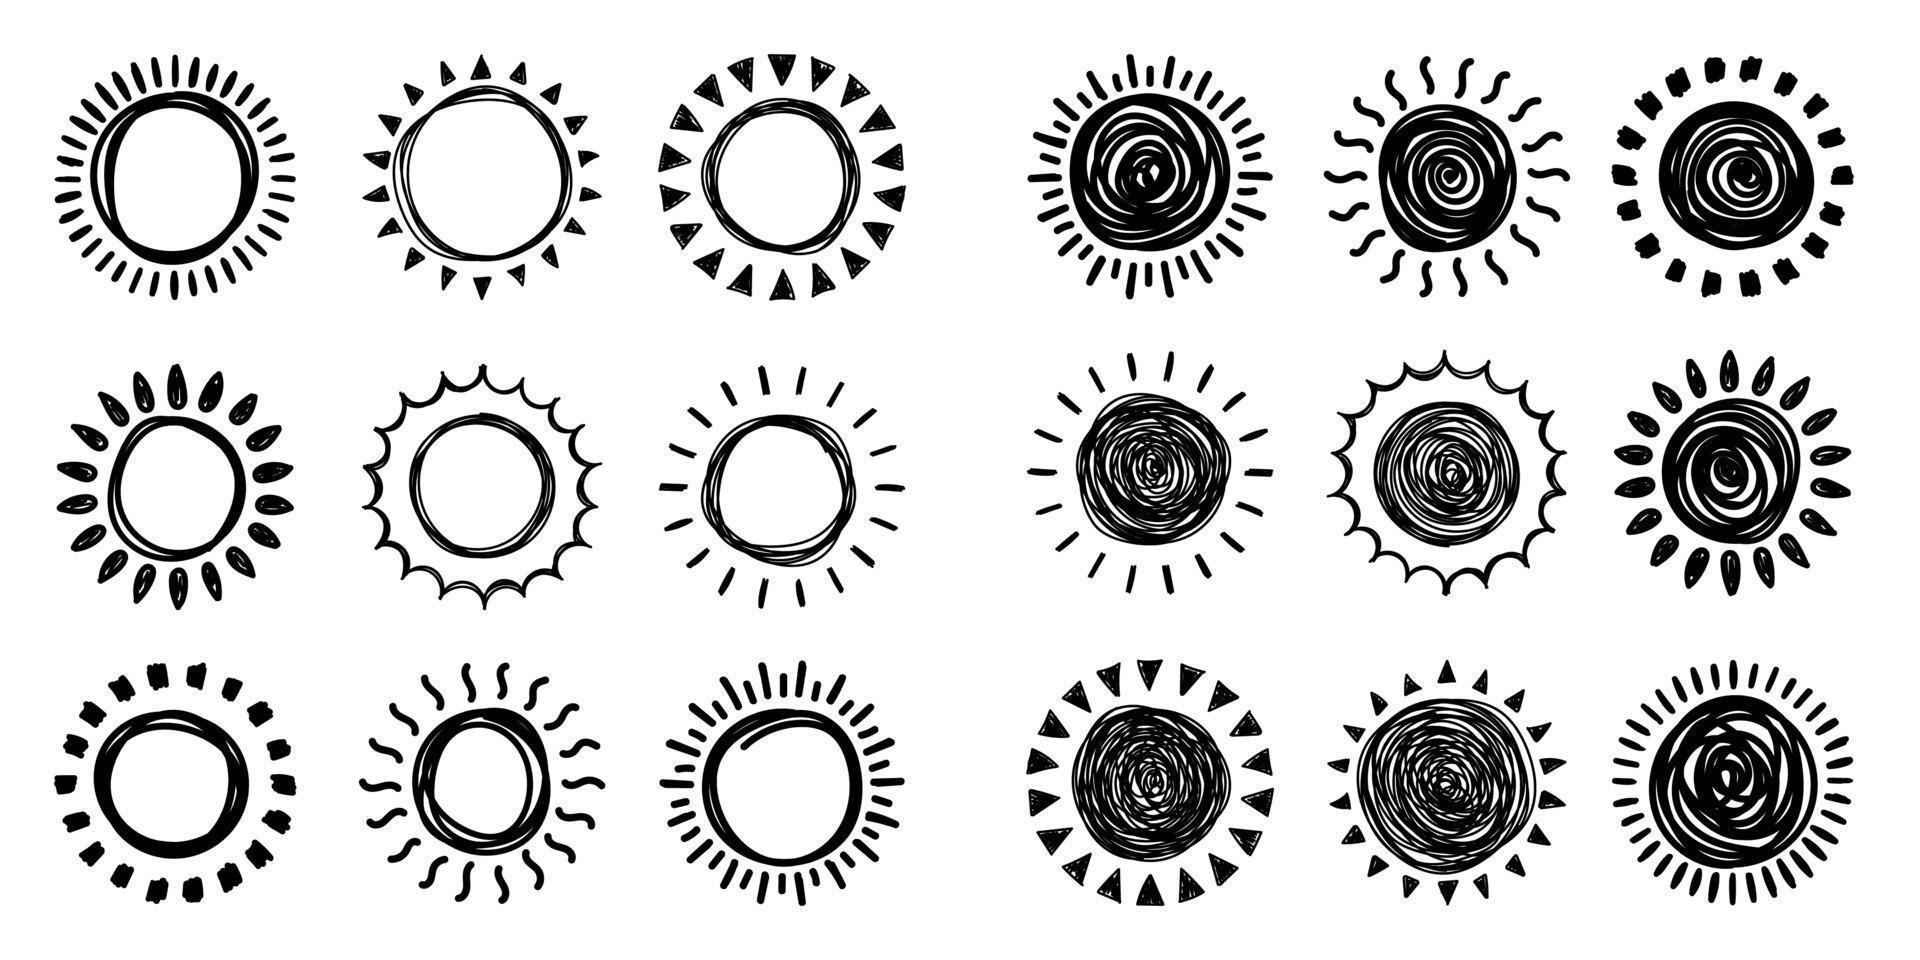 Set of doodle suns sketch, hand drawn style vector